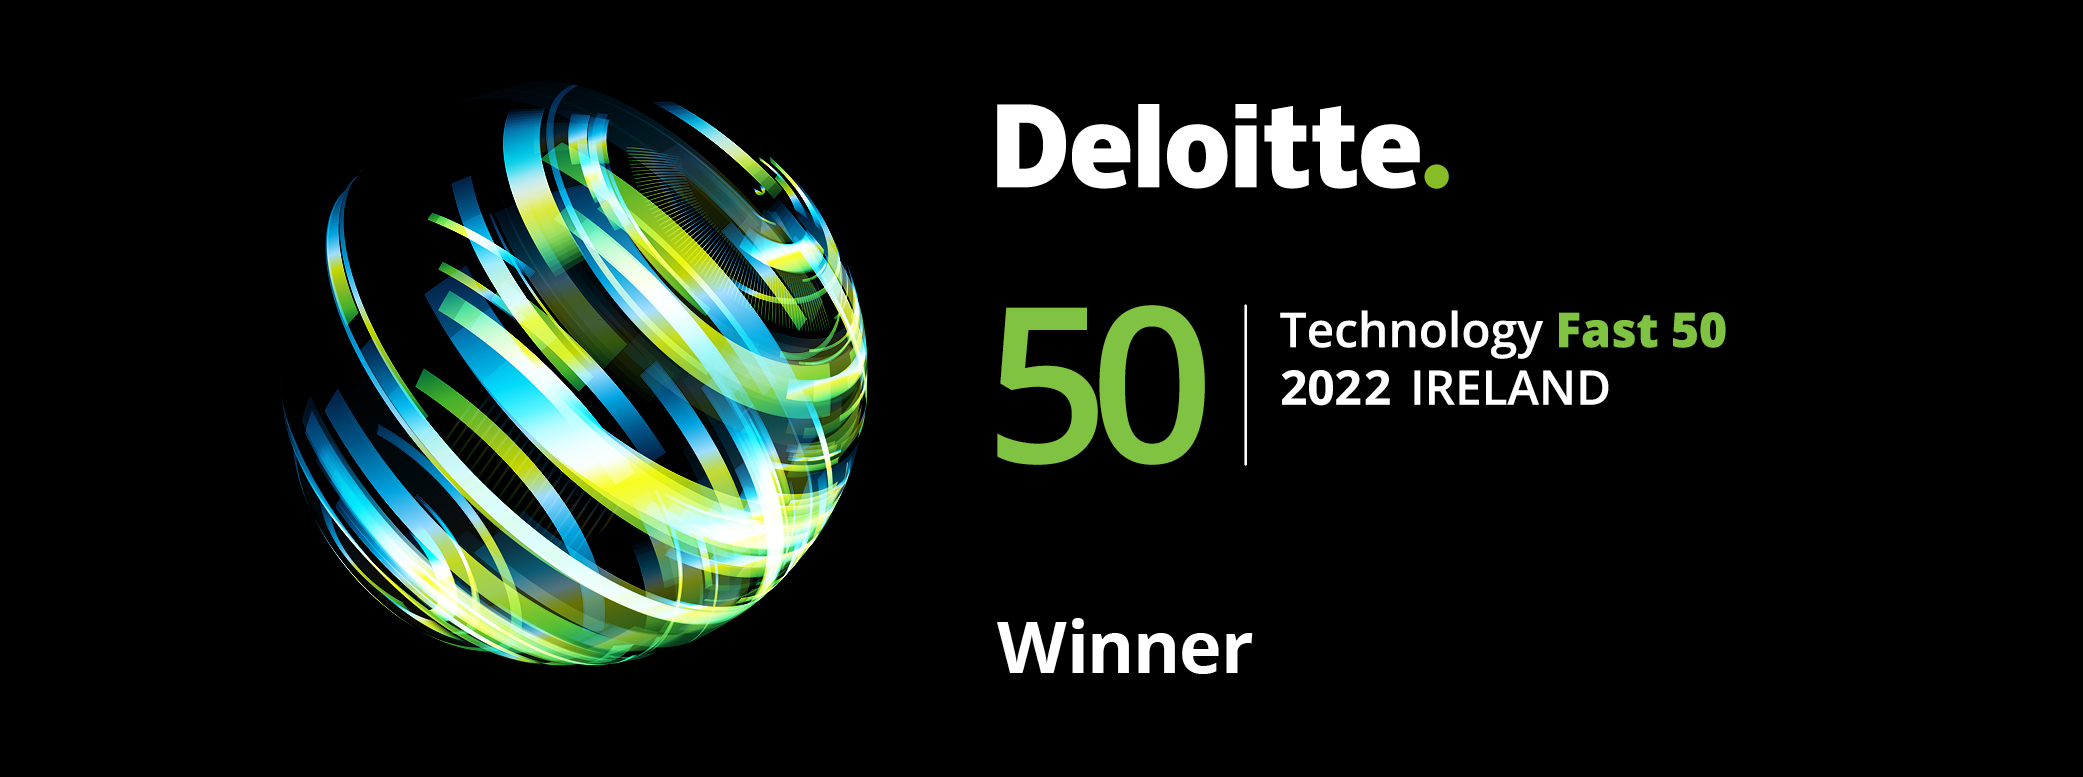 Conjura Ranked 40th in the Deloitte 2022 Technology Fast 50 Awards